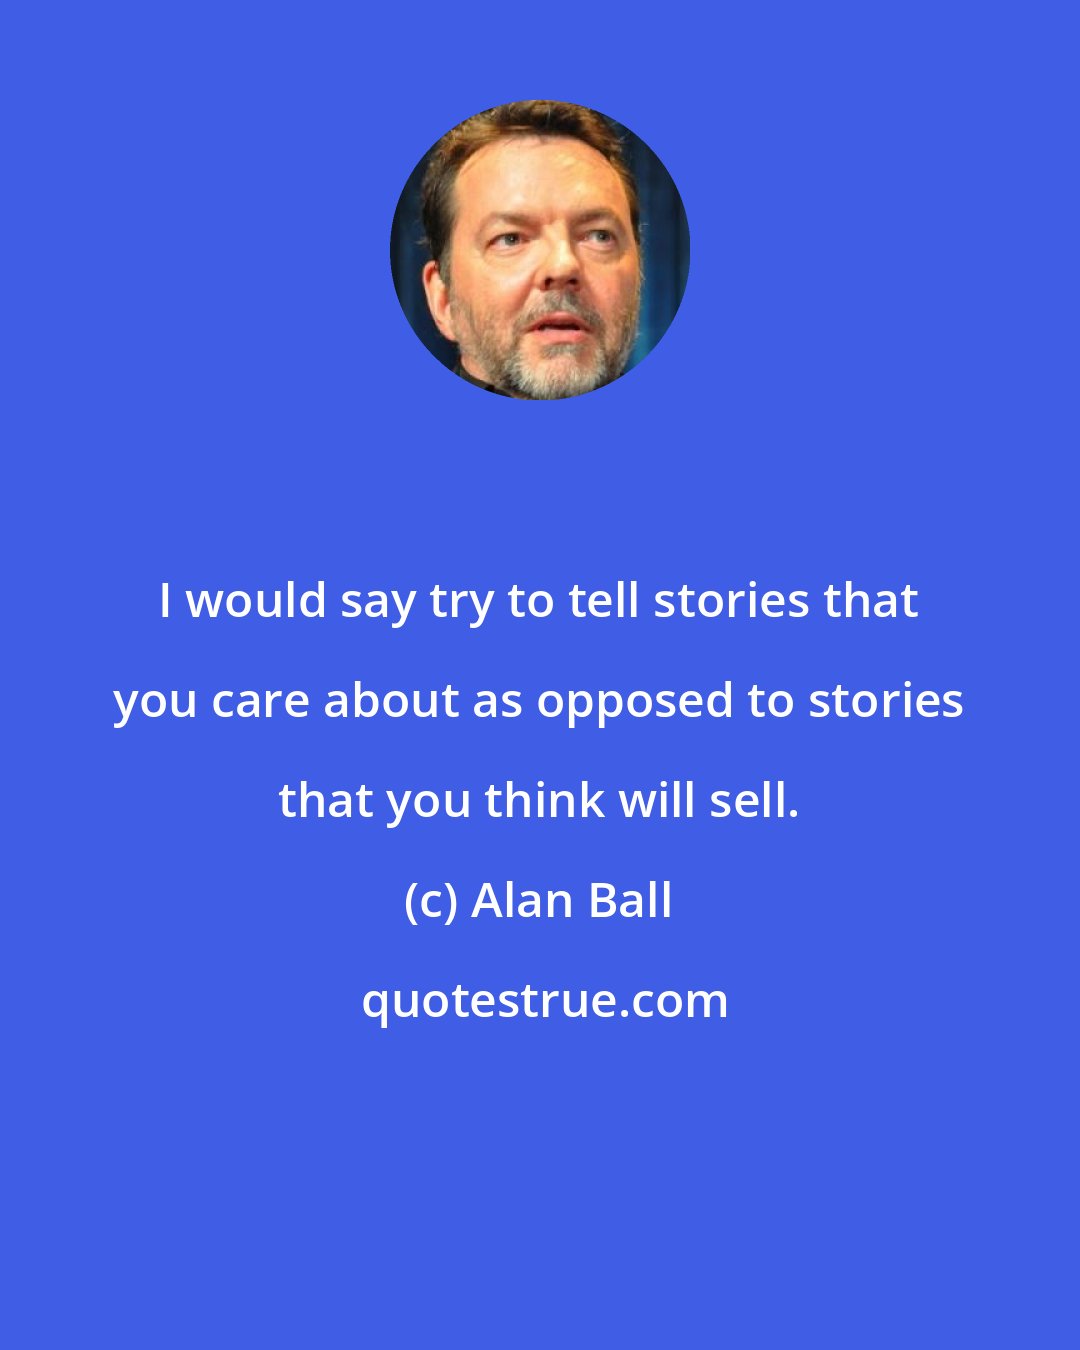 Alan Ball: I would say try to tell stories that you care about as opposed to stories that you think will sell.